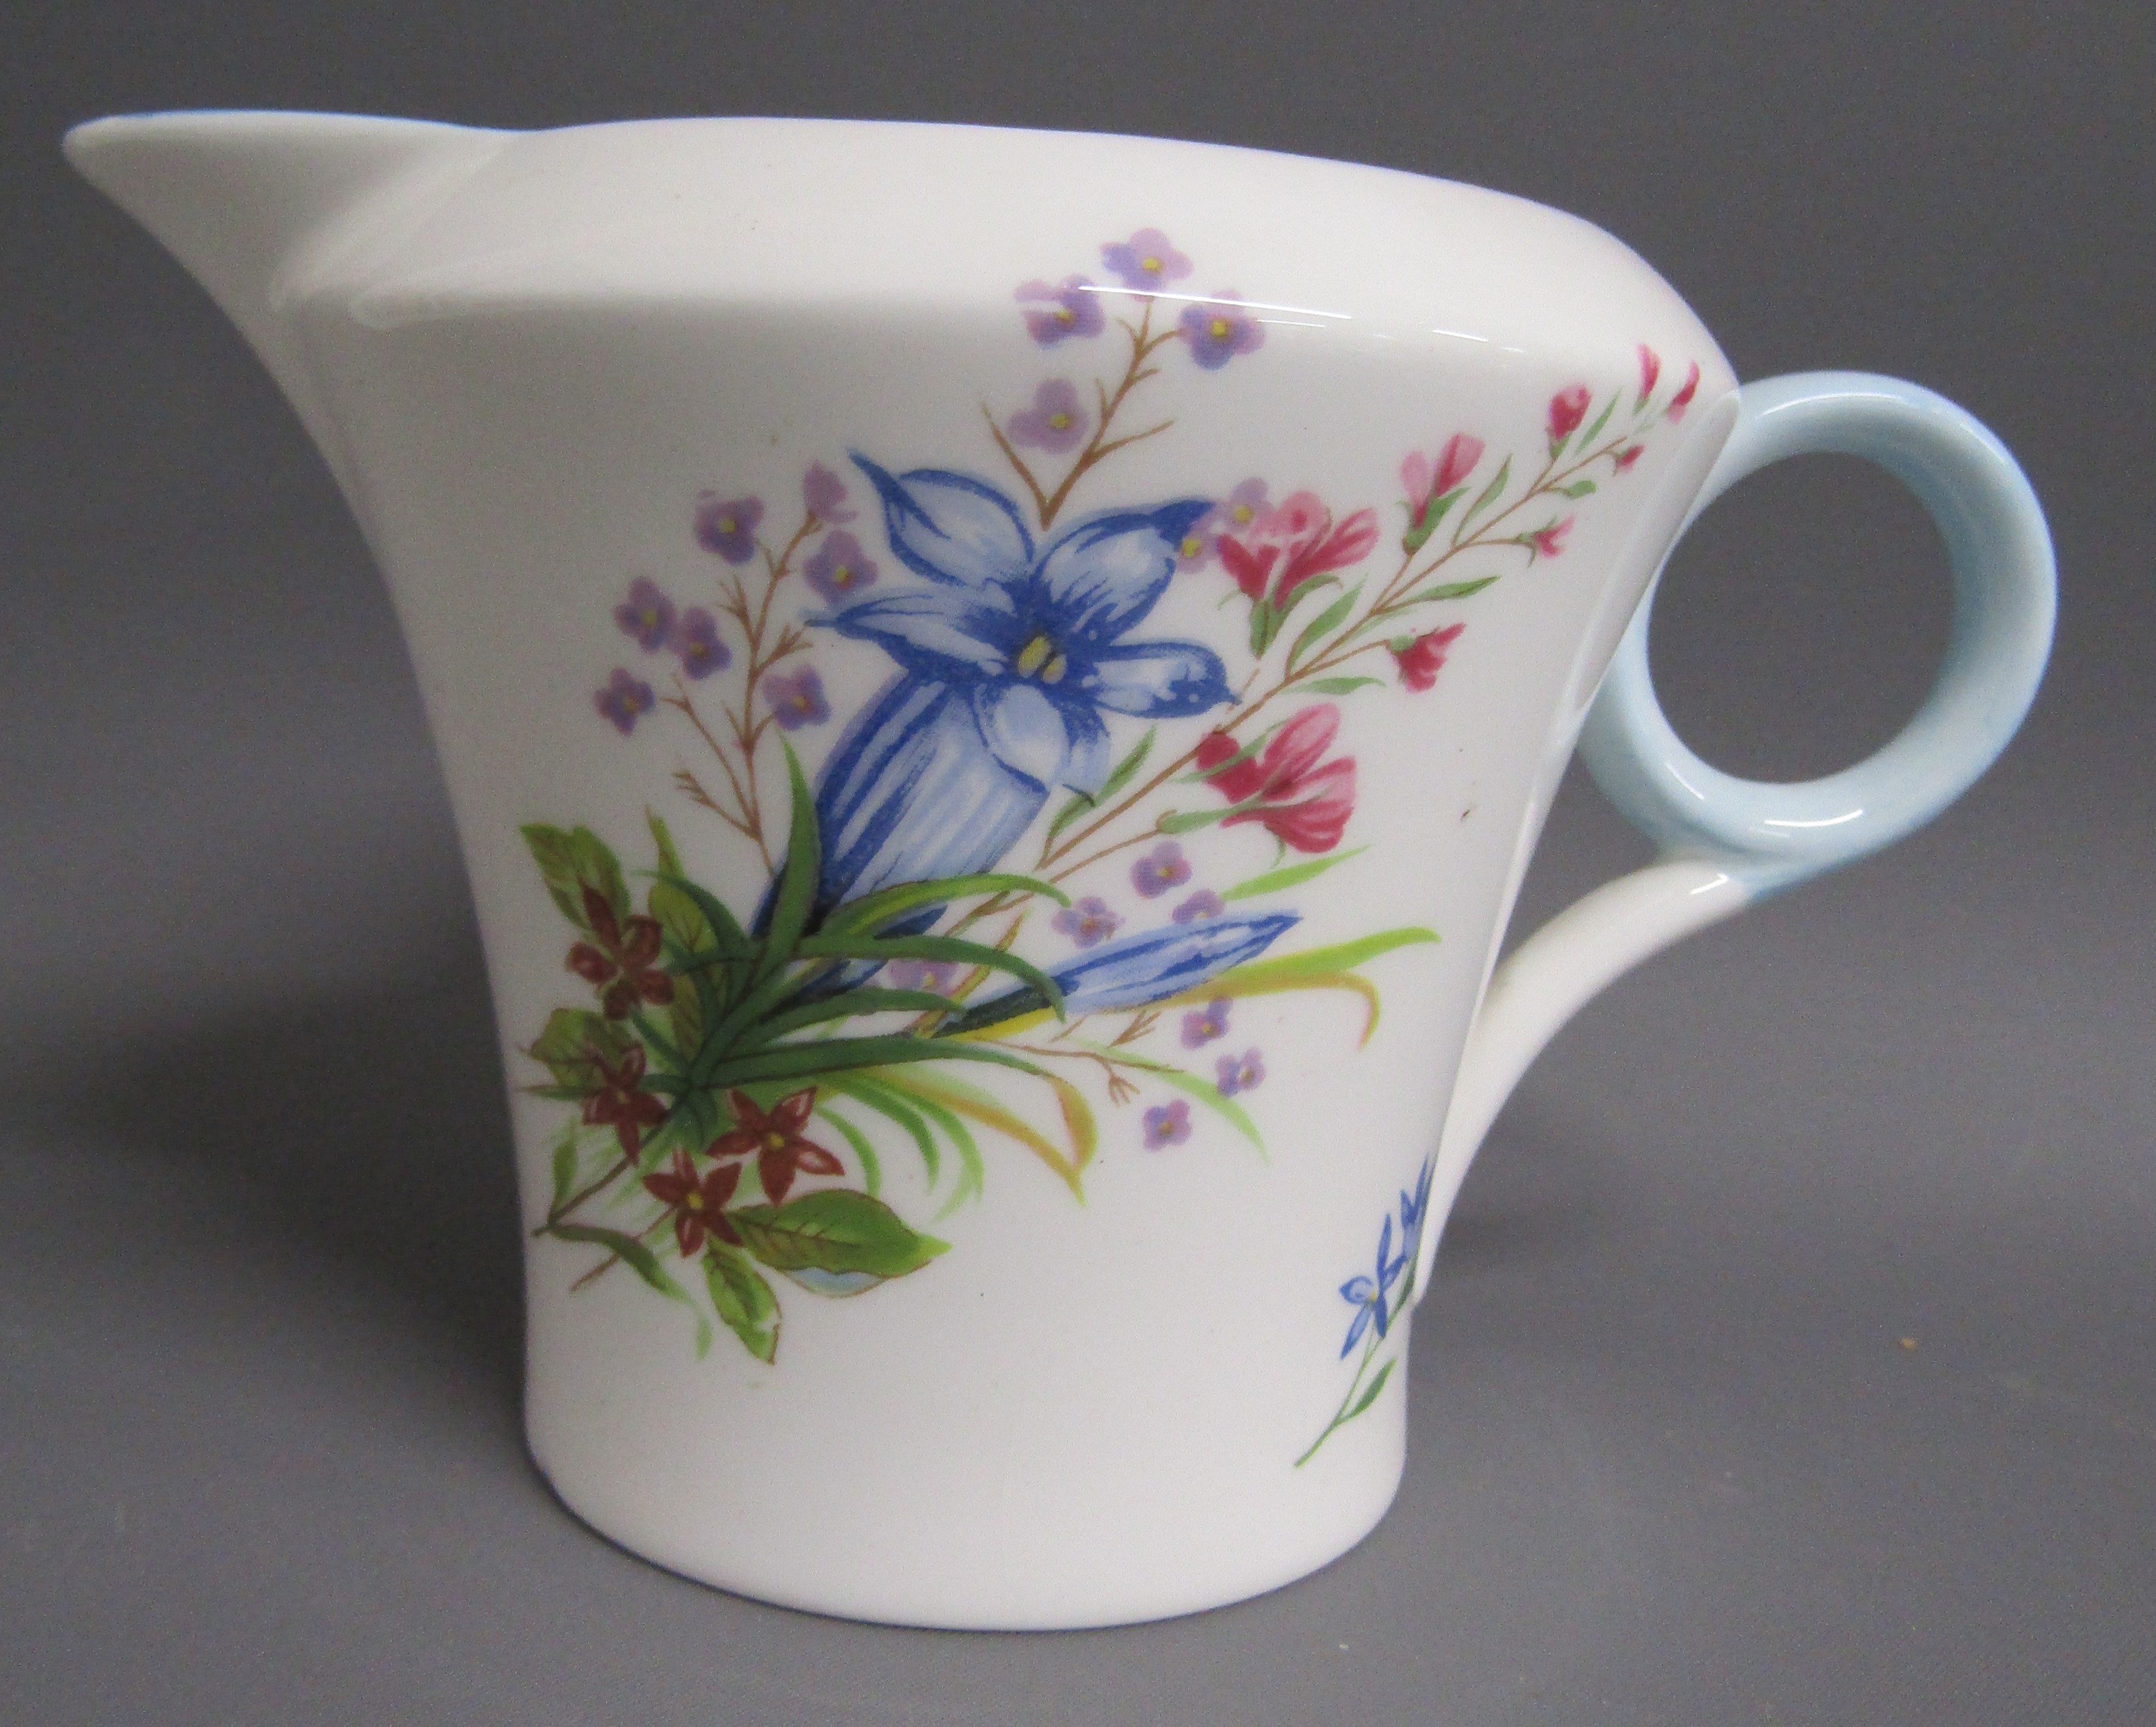 Shelley 'Wild Flowers' 13668 cake plate, milk jug, sugar bowl, side plates, cups & saucers - one cup - Image 3 of 5